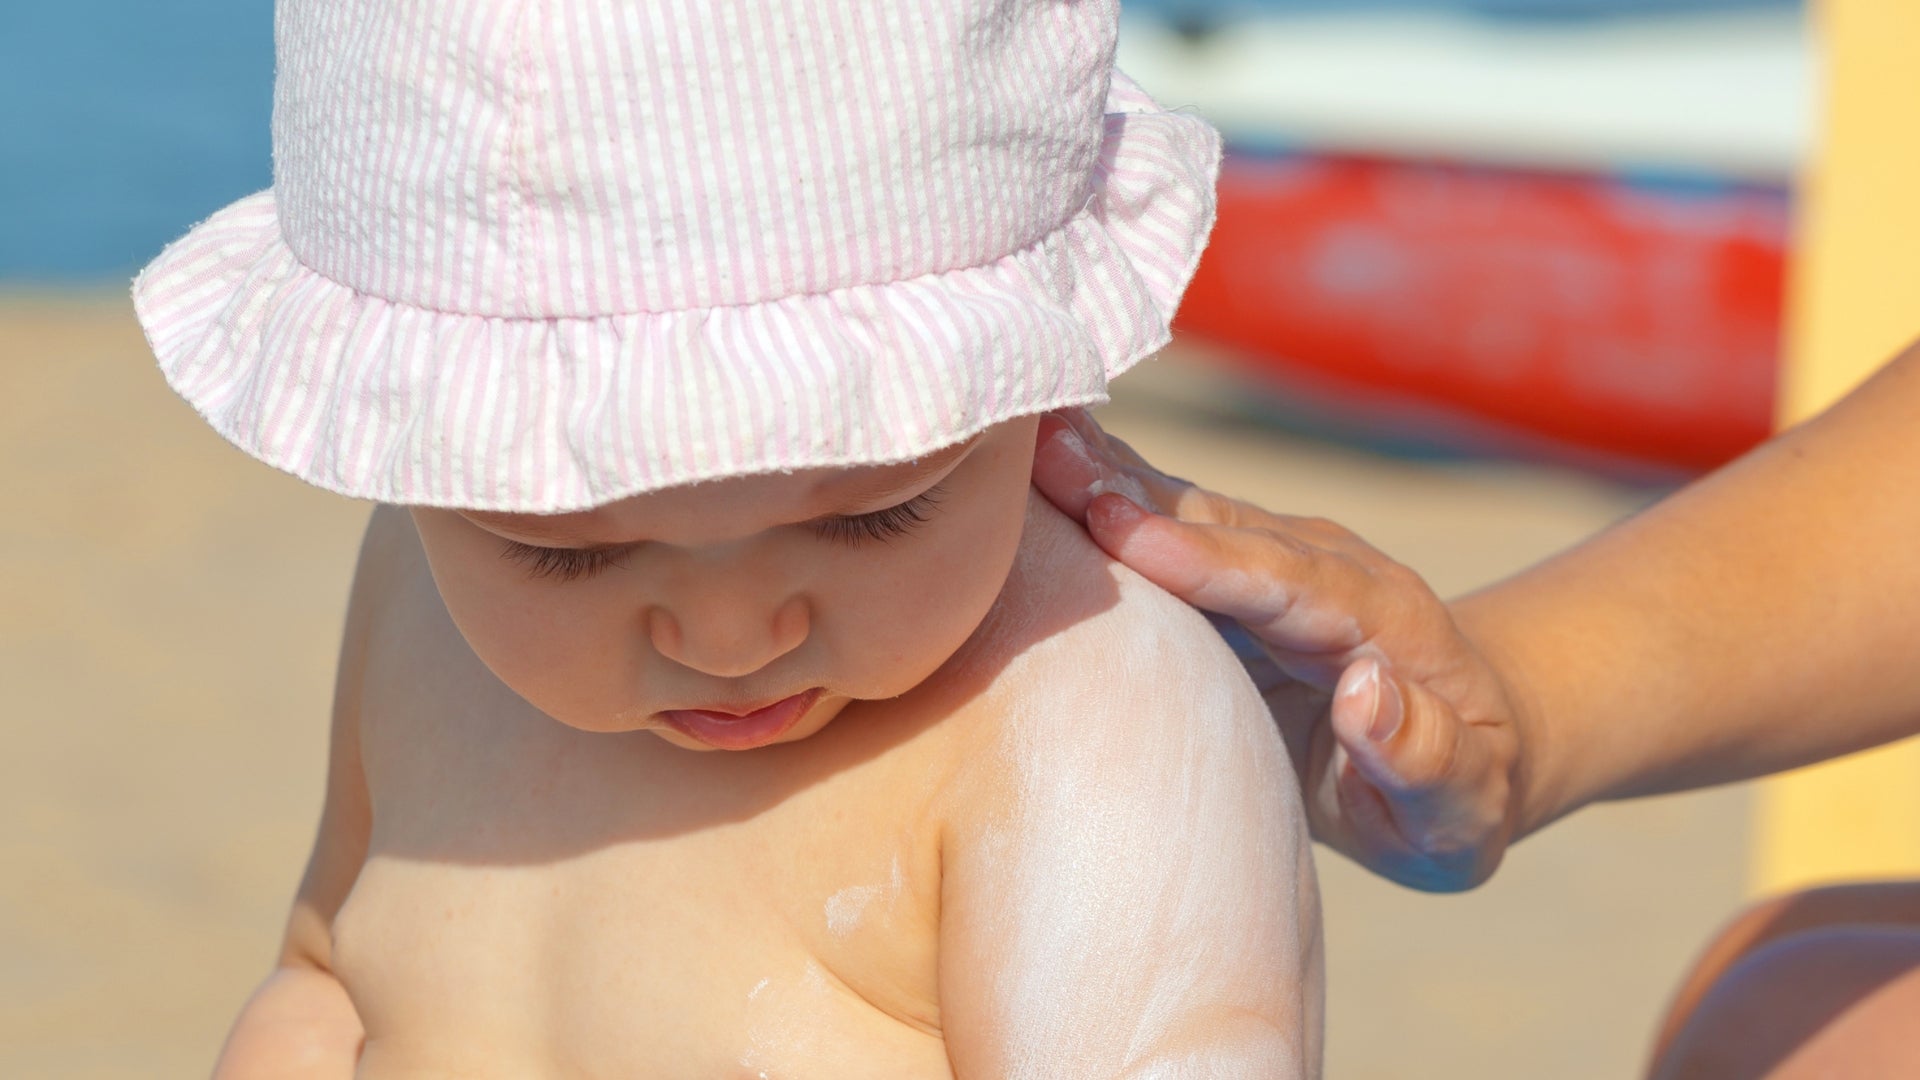 Woman applying sun protection sunscreen to her baby